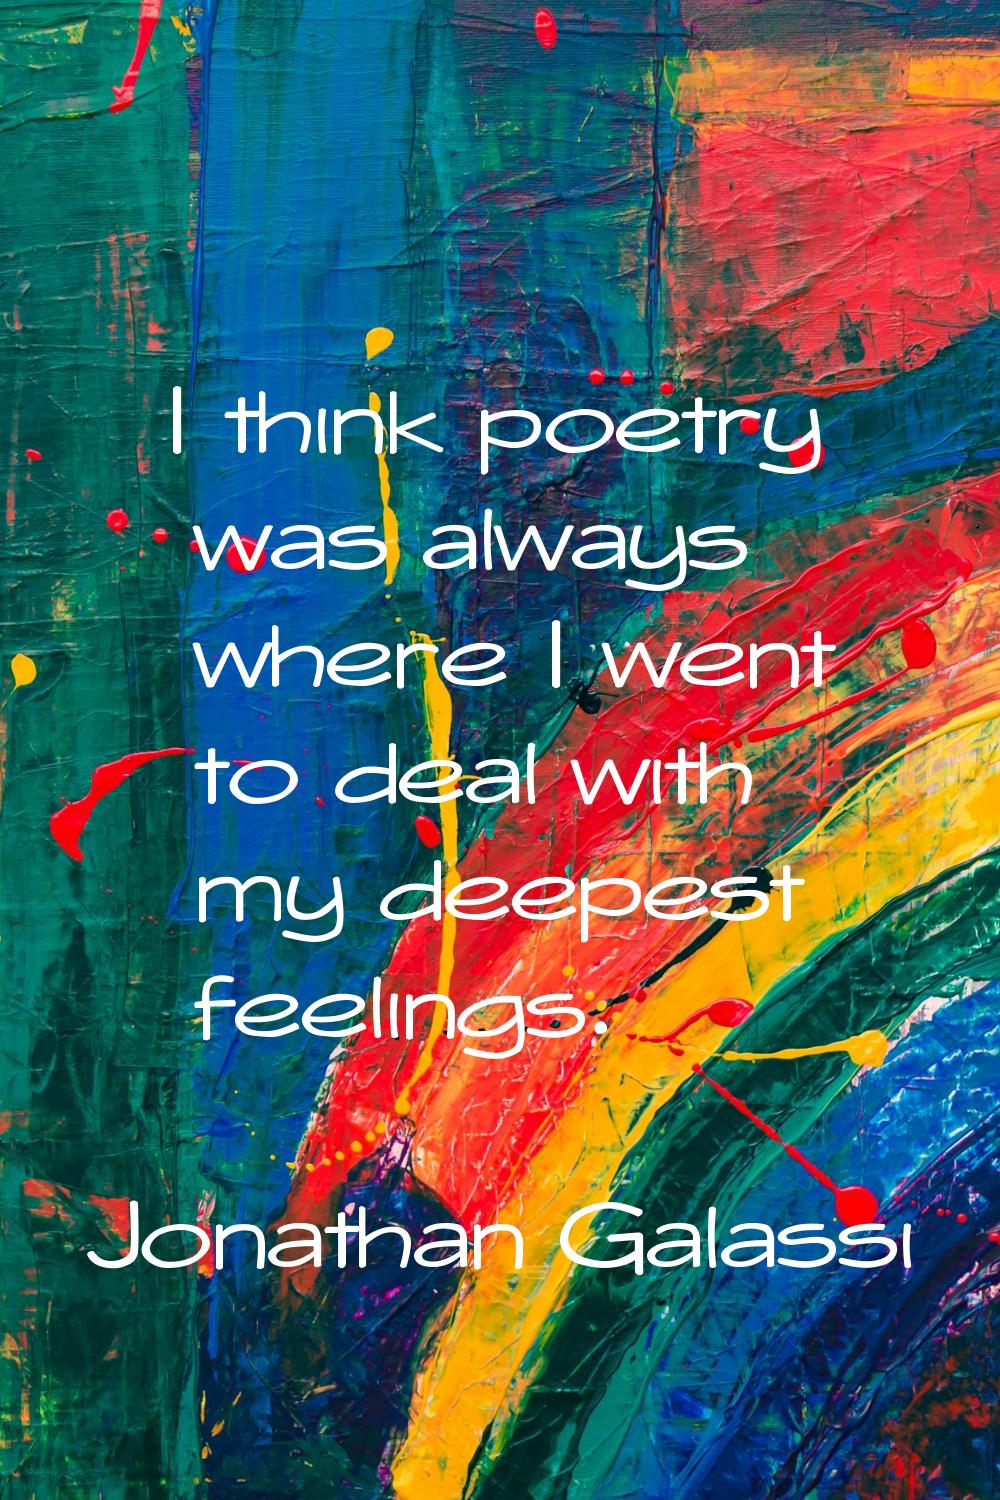 I think poetry was always where I went to deal with my deepest feelings.